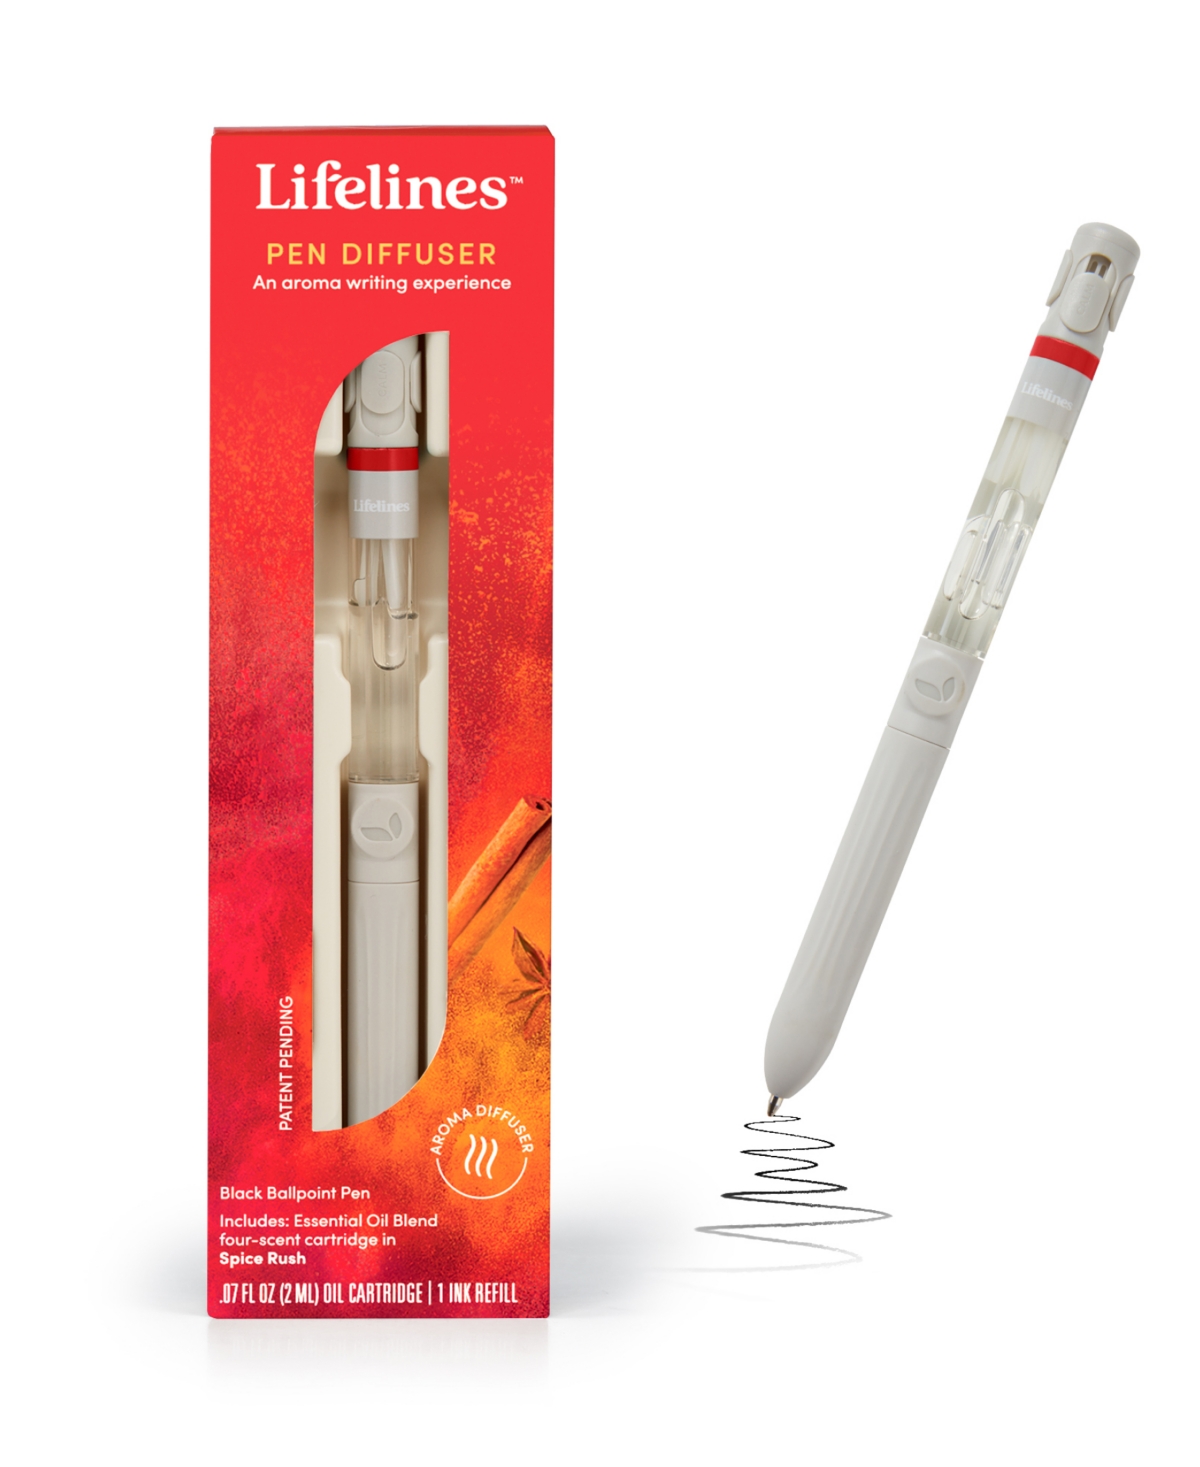 Lifelines Pen Diffuser With 4 Scent Cartridge In Spice Rush In Red